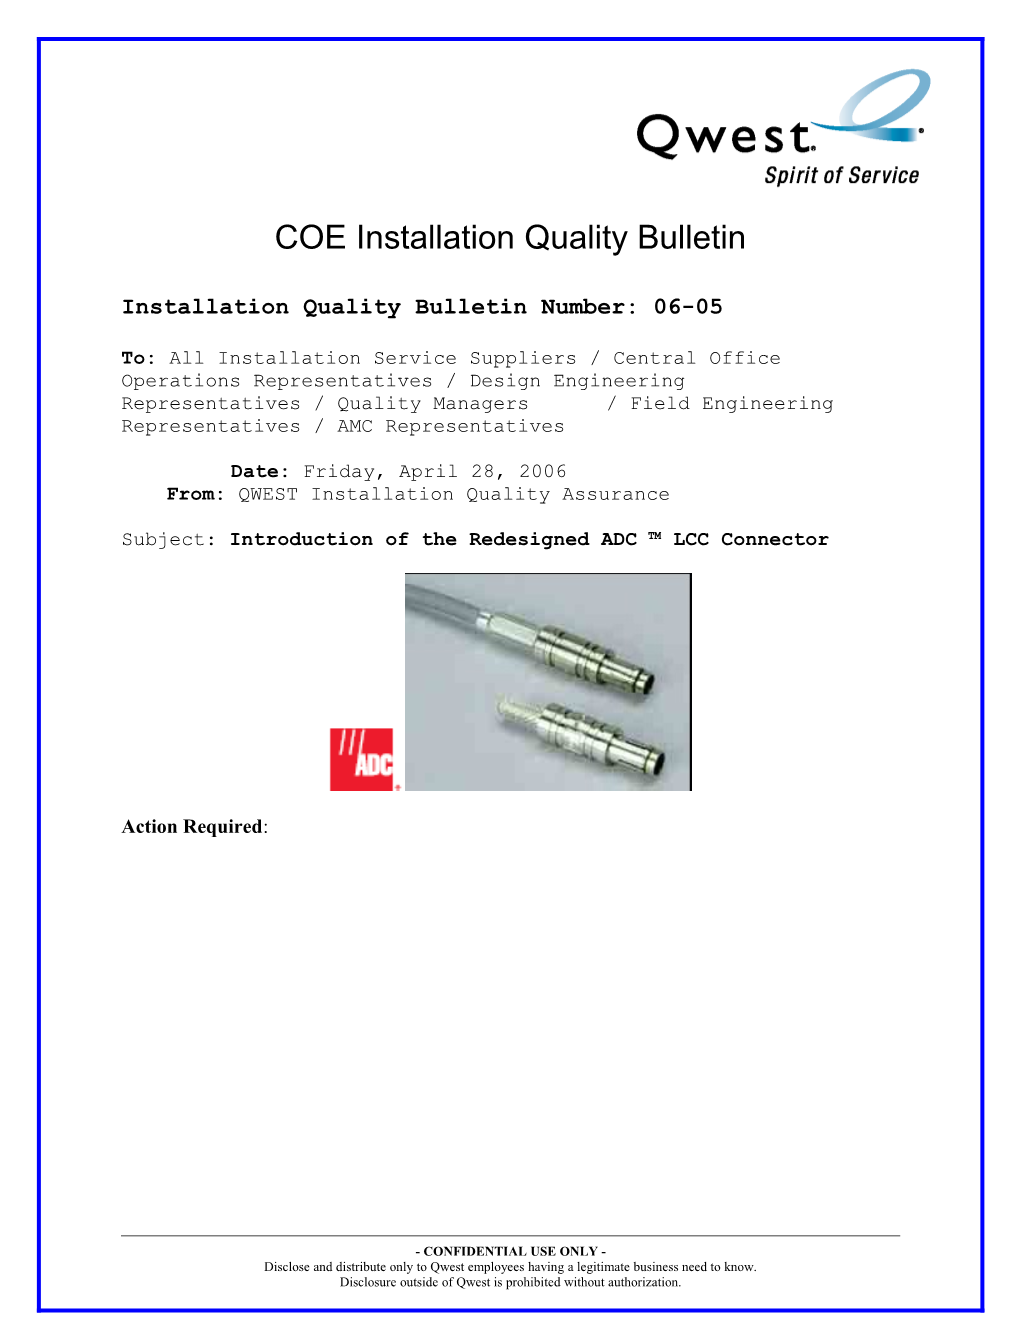 Installation Quality Bulletin Number: 06-05